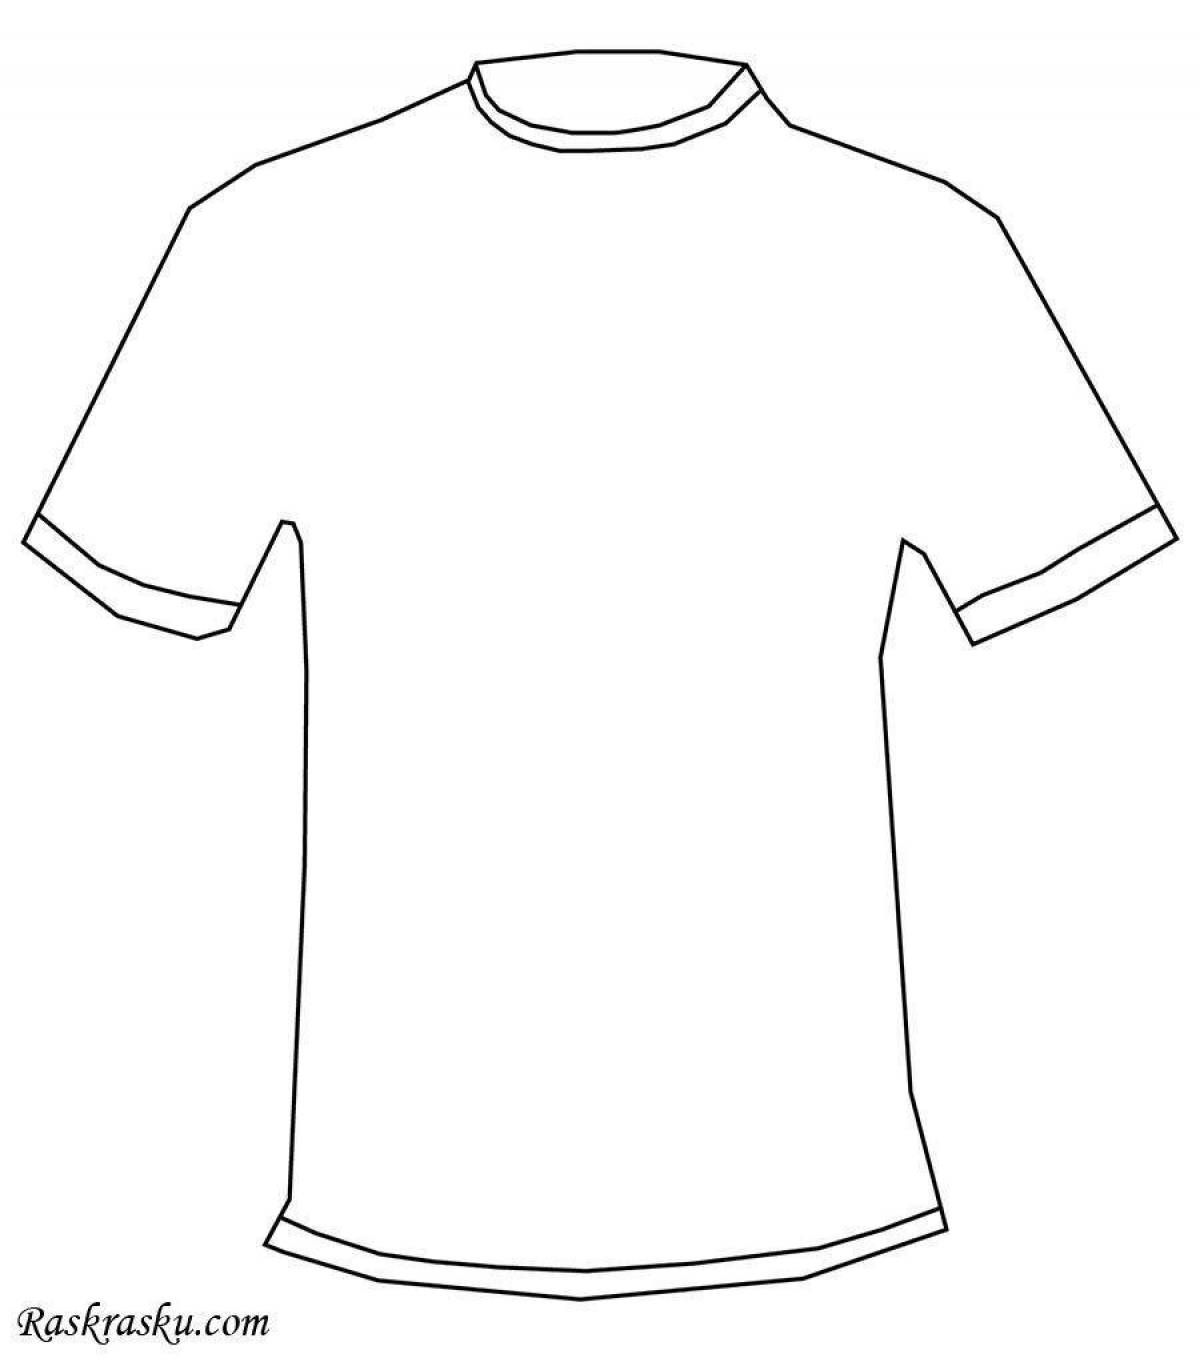 Colorful t-shirt coloring page for kids of all ages